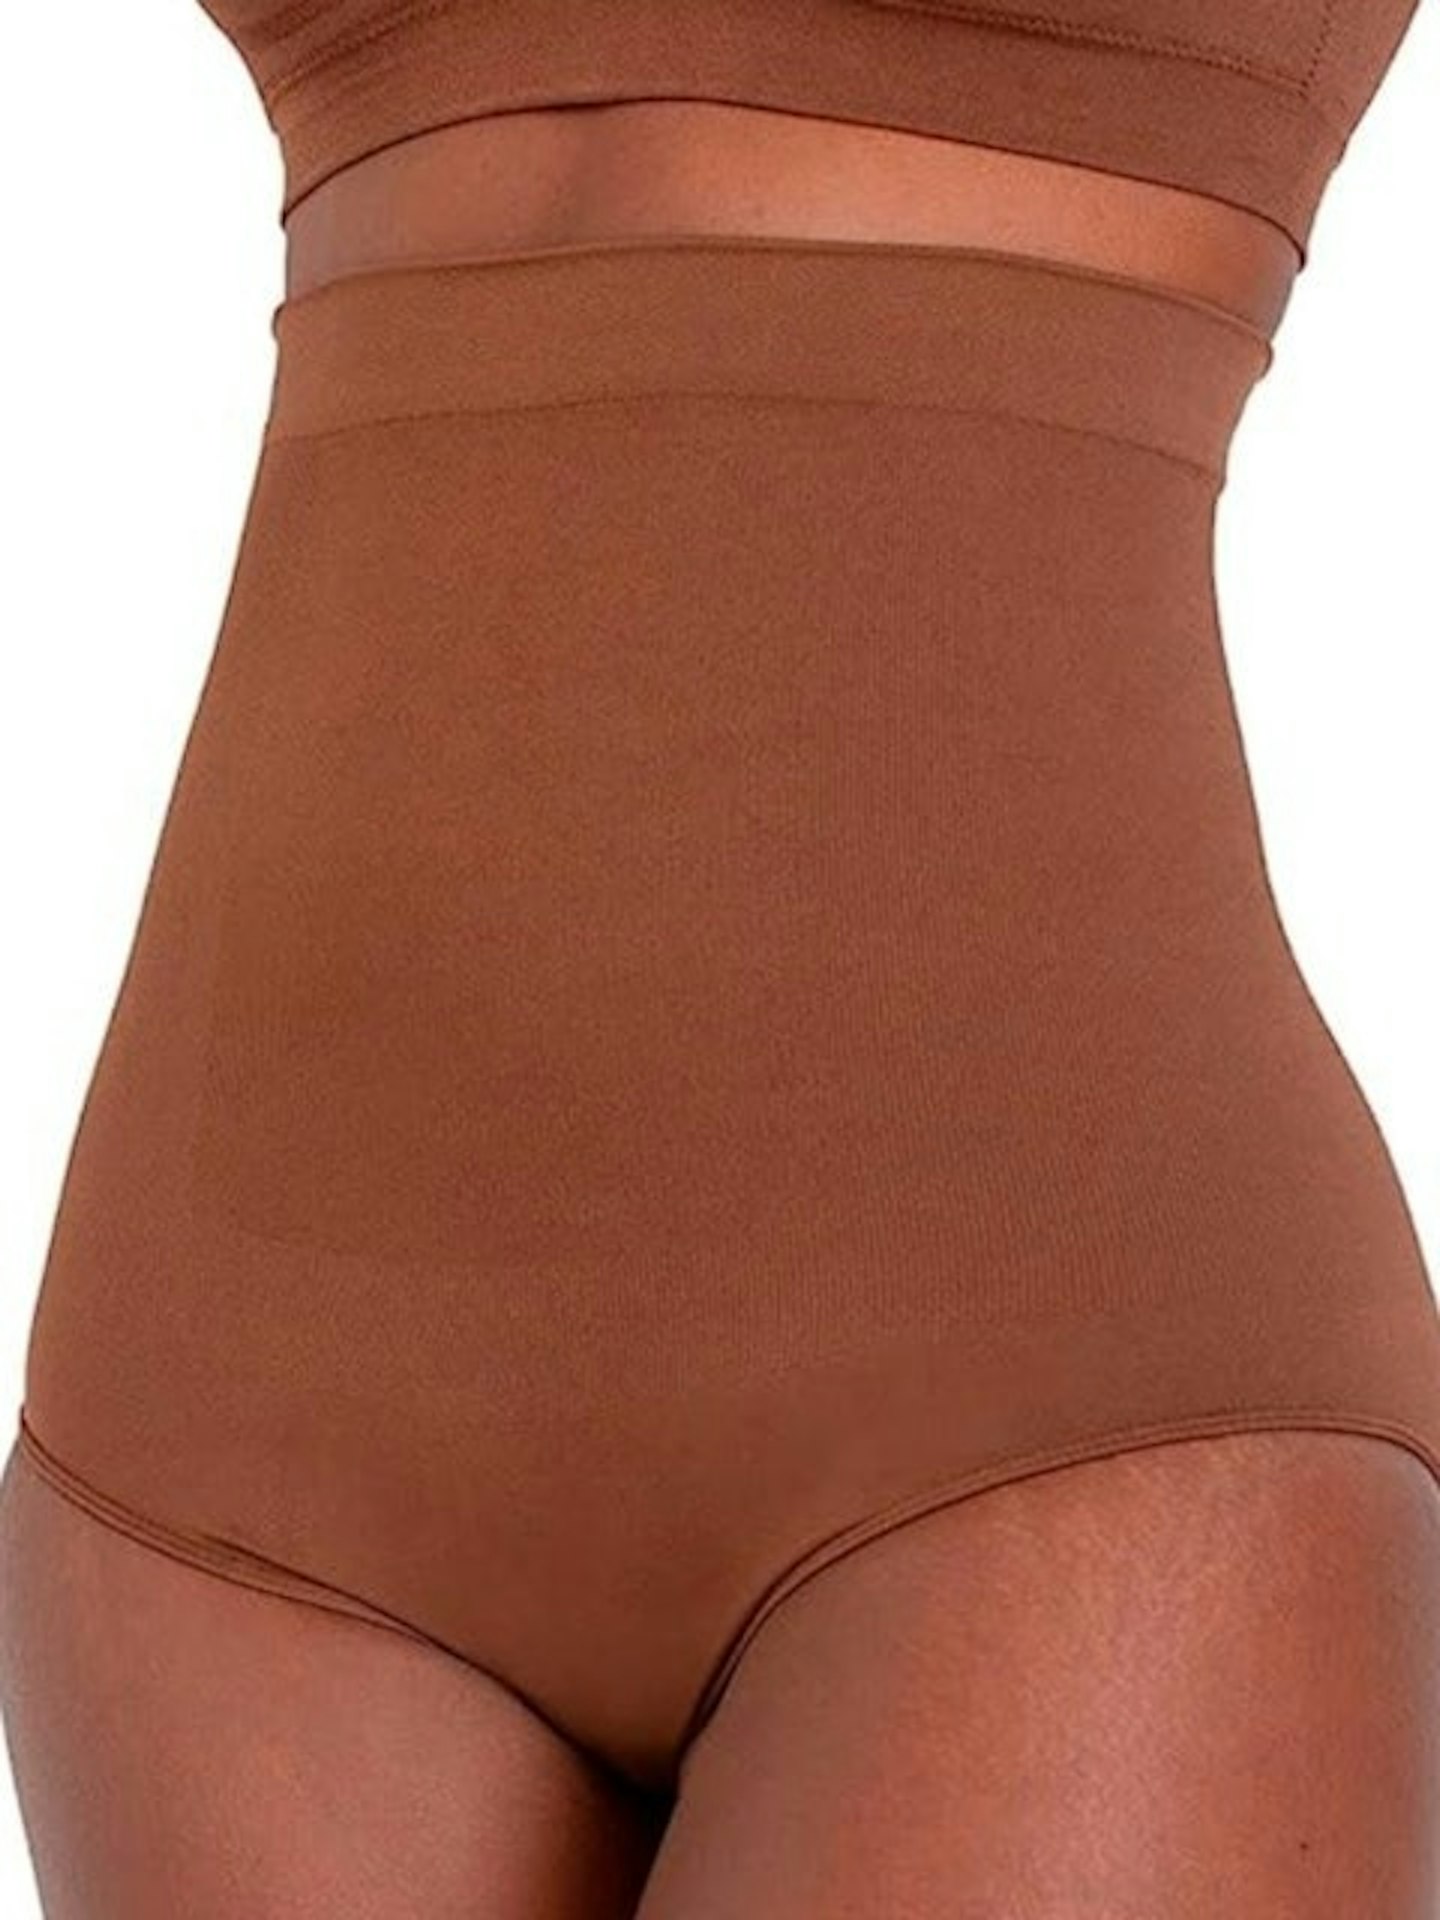 Shapermint for Women Brown Shapewear Bodysuit Thong Tummy Control Body  Shaper Slimming With Built In Bra Deep V